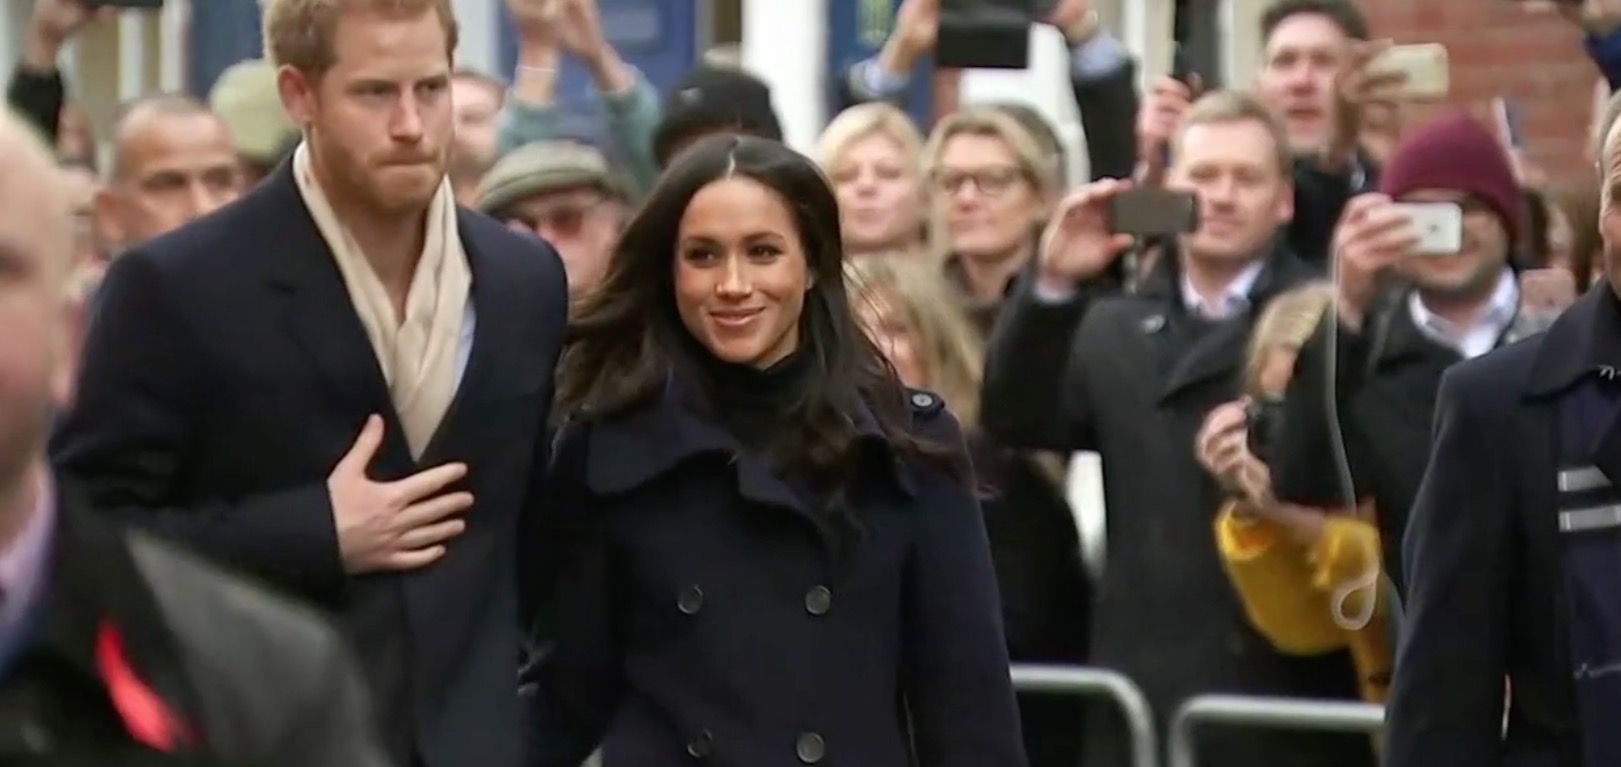 Meghan Markle's £425 Strathberry crossbody bag sells out